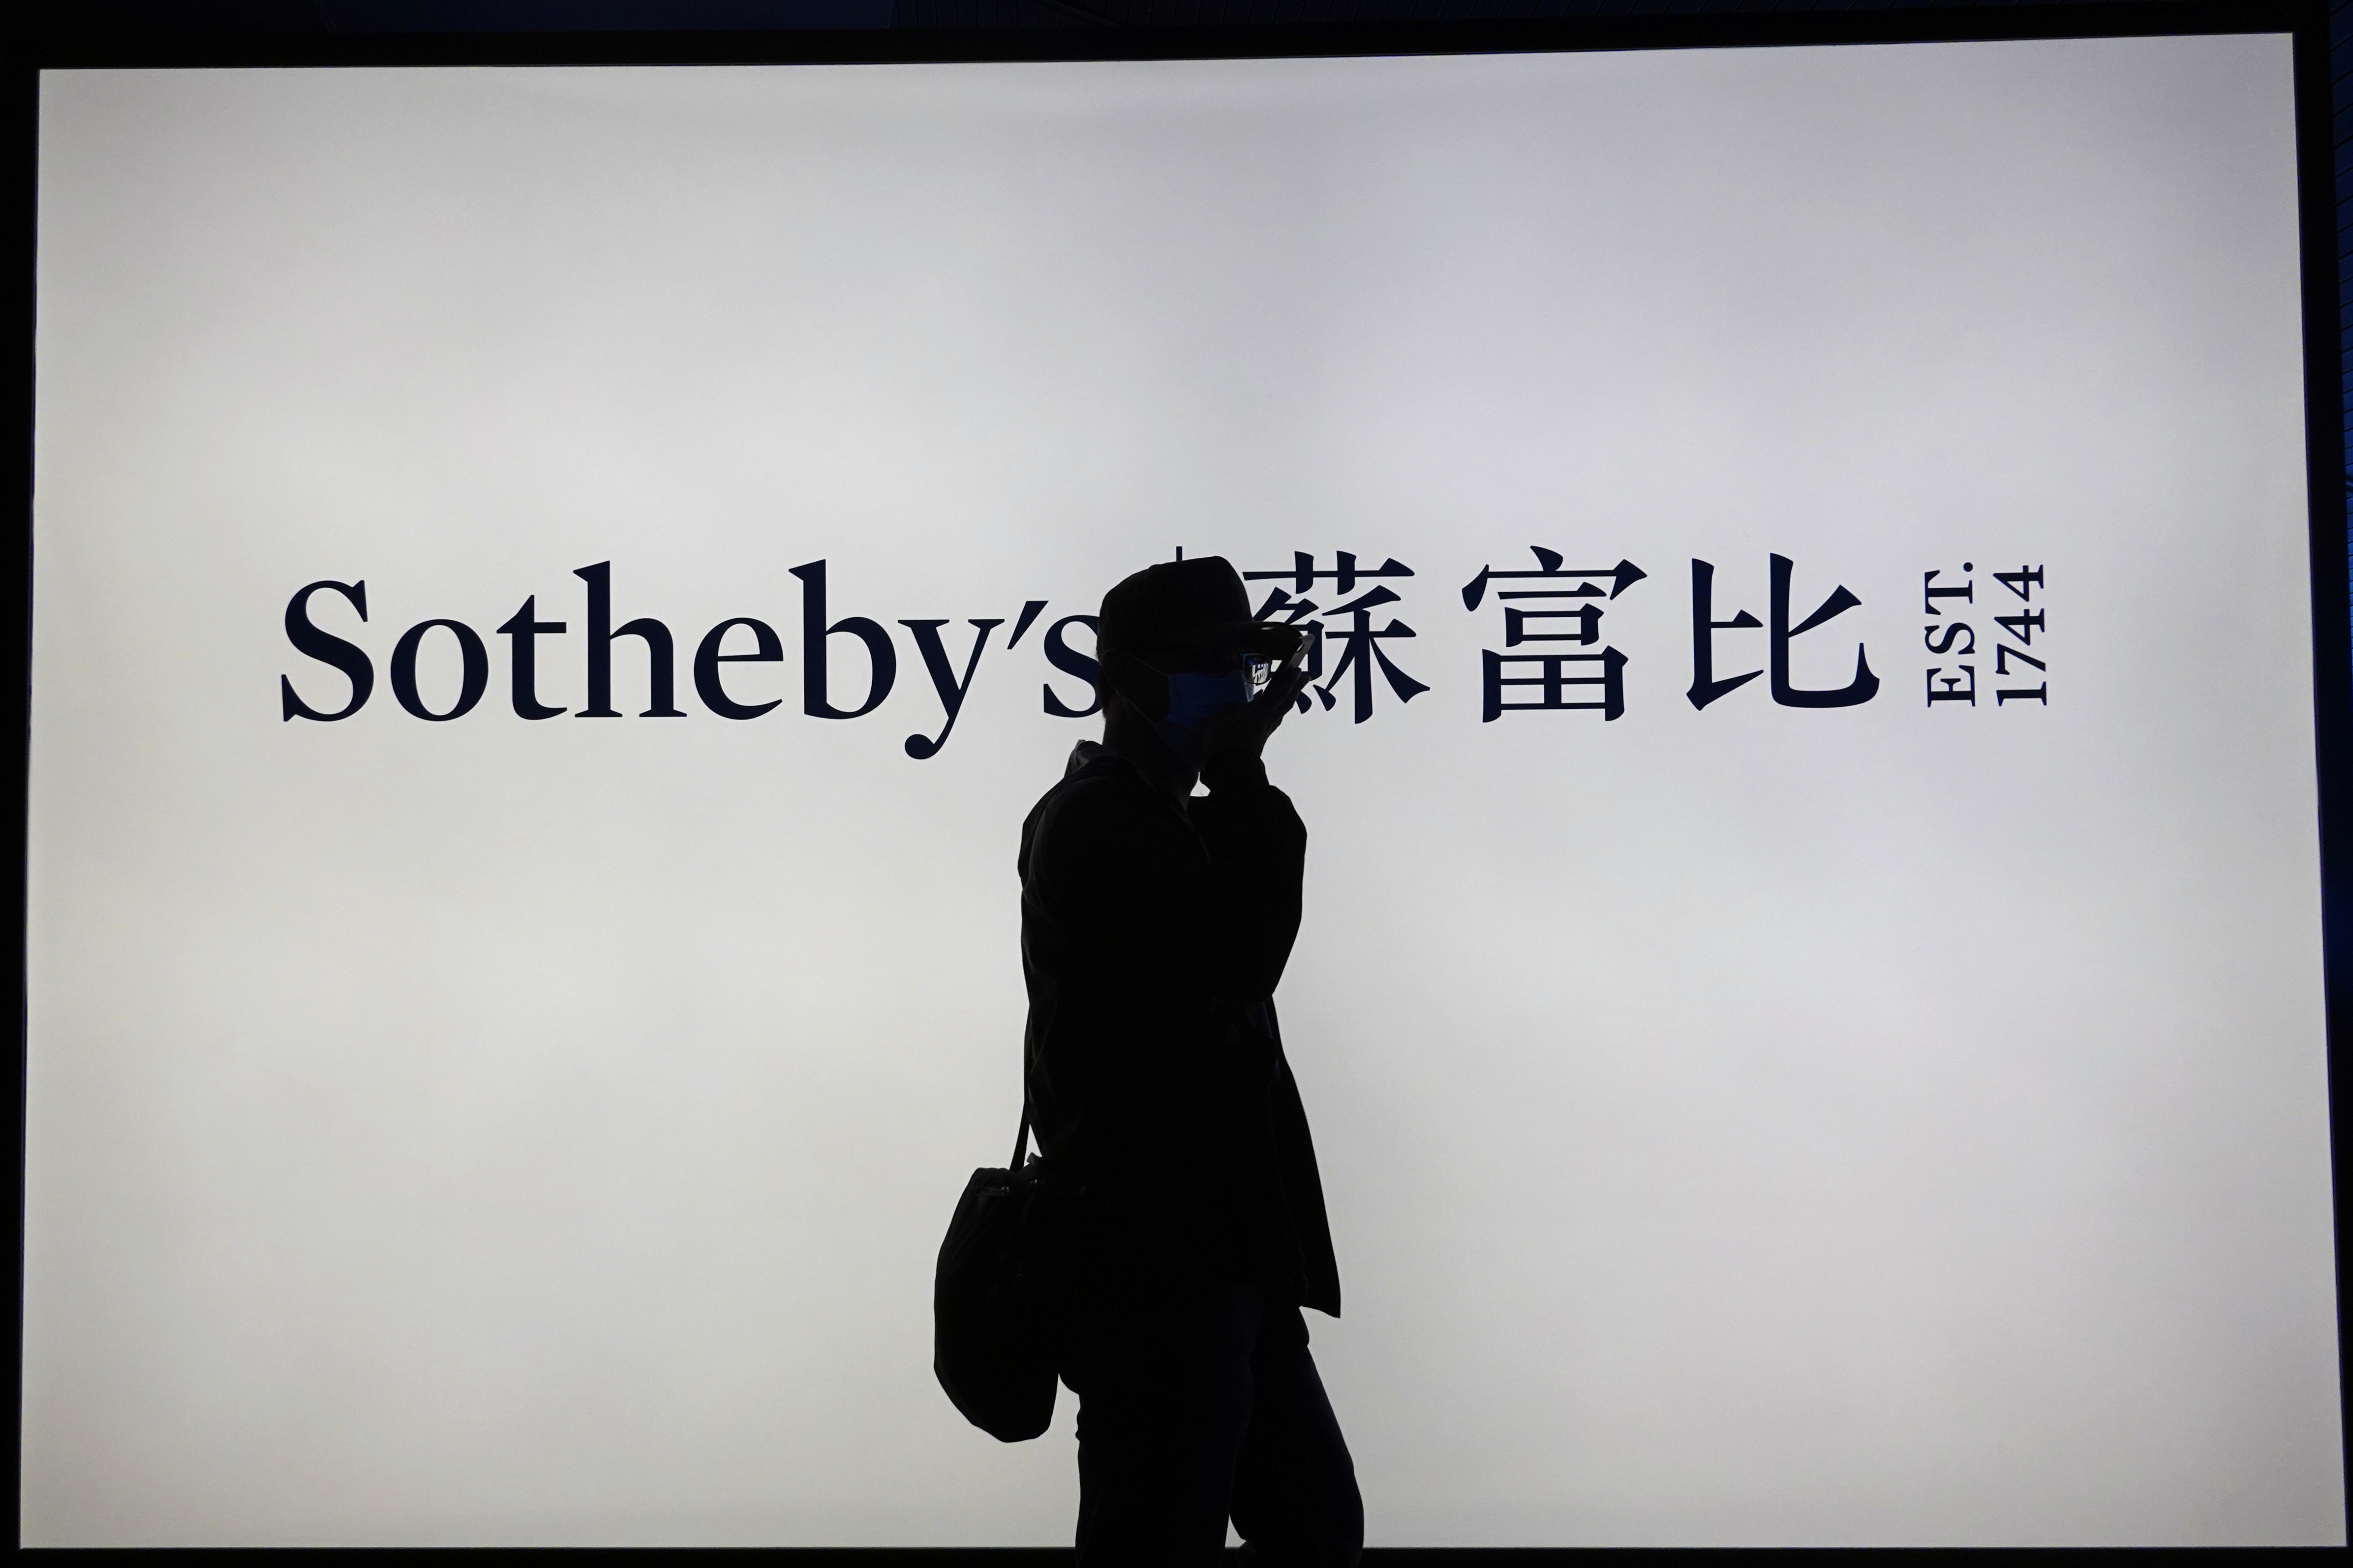 Sotheby's Hong Kong Hopes to Nab Up to $20 Million This Month With